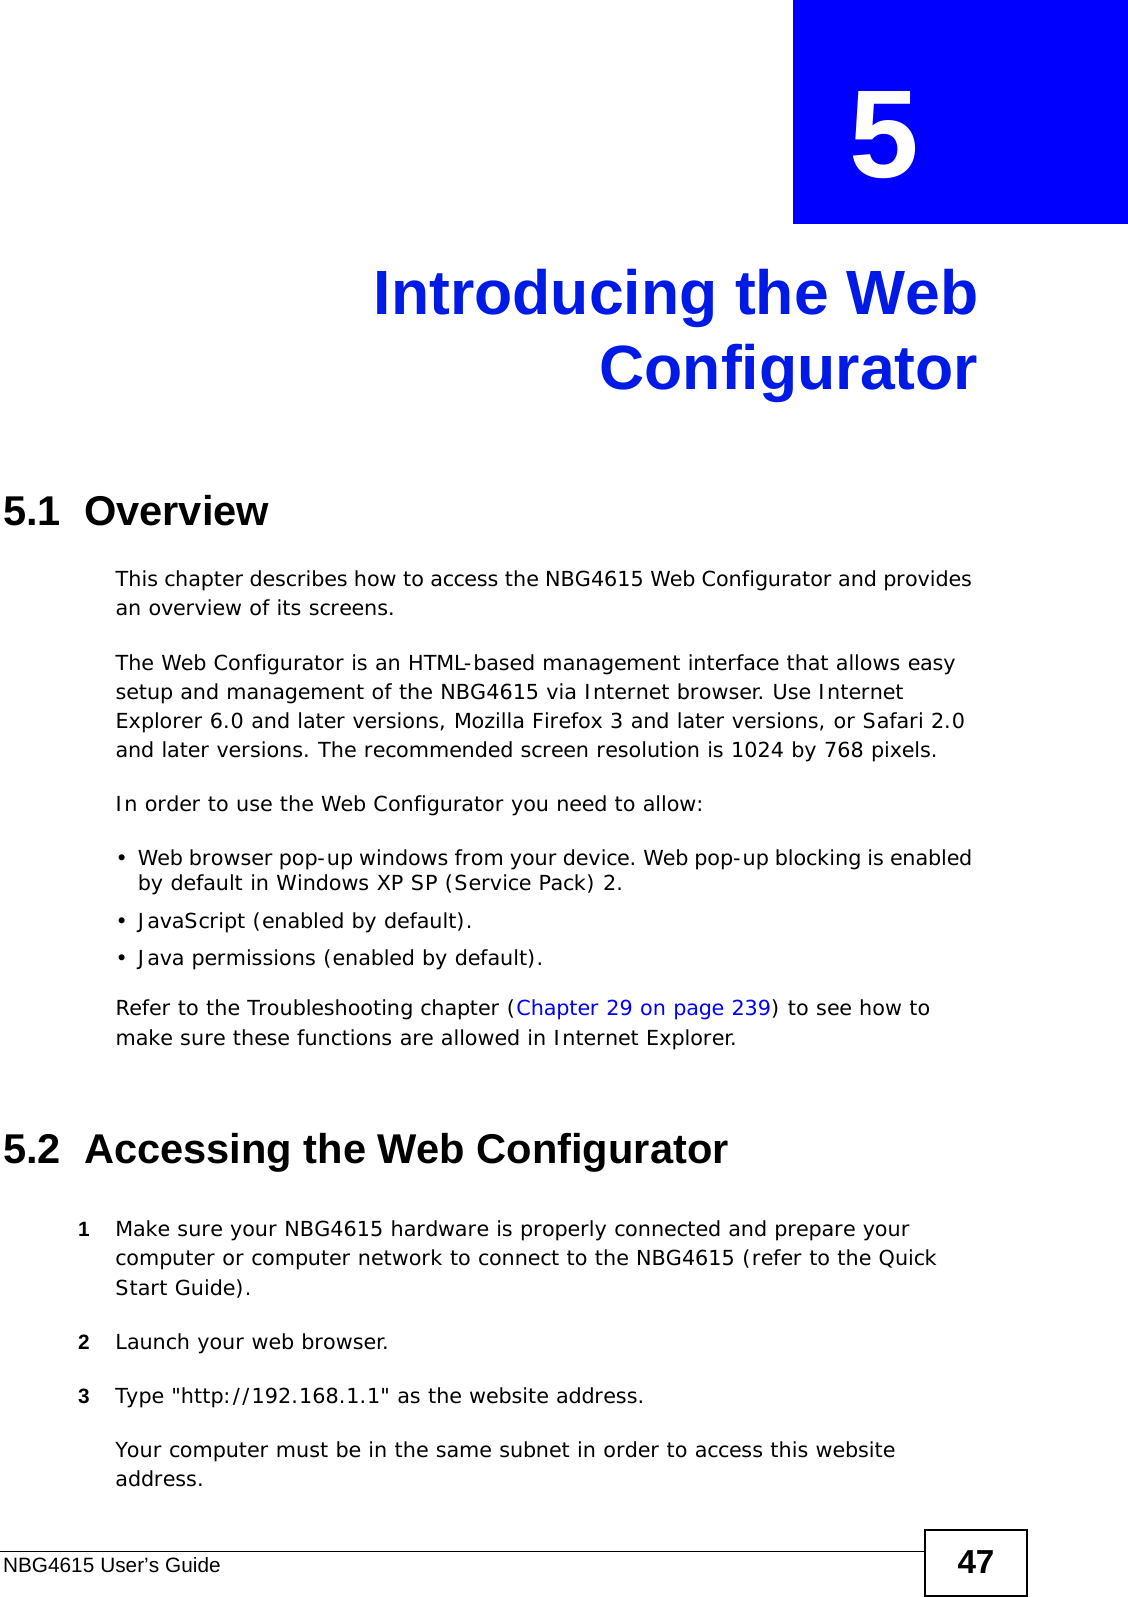 NBG4615 User’s Guide 47CHAPTER  5 Introducing the WebConfigurator5.1  OverviewThis chapter describes how to access the NBG4615 Web Configurator and provides an overview of its screens.The Web Configurator is an HTML-based management interface that allows easy setup and management of the NBG4615 via Internet browser. Use Internet Explorer 6.0 and later versions, Mozilla Firefox 3 and later versions, or Safari 2.0 and later versions. The recommended screen resolution is 1024 by 768 pixels.In order to use the Web Configurator you need to allow:• Web browser pop-up windows from your device. Web pop-up blocking is enabled by default in Windows XP SP (Service Pack) 2.• JavaScript (enabled by default).• Java permissions (enabled by default).Refer to the Troubleshooting chapter (Chapter 29 on page 239) to see how to make sure these functions are allowed in Internet Explorer.5.2  Accessing the Web Configurator1Make sure your NBG4615 hardware is properly connected and prepare your computer or computer network to connect to the NBG4615 (refer to the Quick Start Guide).2Launch your web browser.3Type &quot;http://192.168.1.1&quot; as the website address. Your computer must be in the same subnet in order to access this website address.